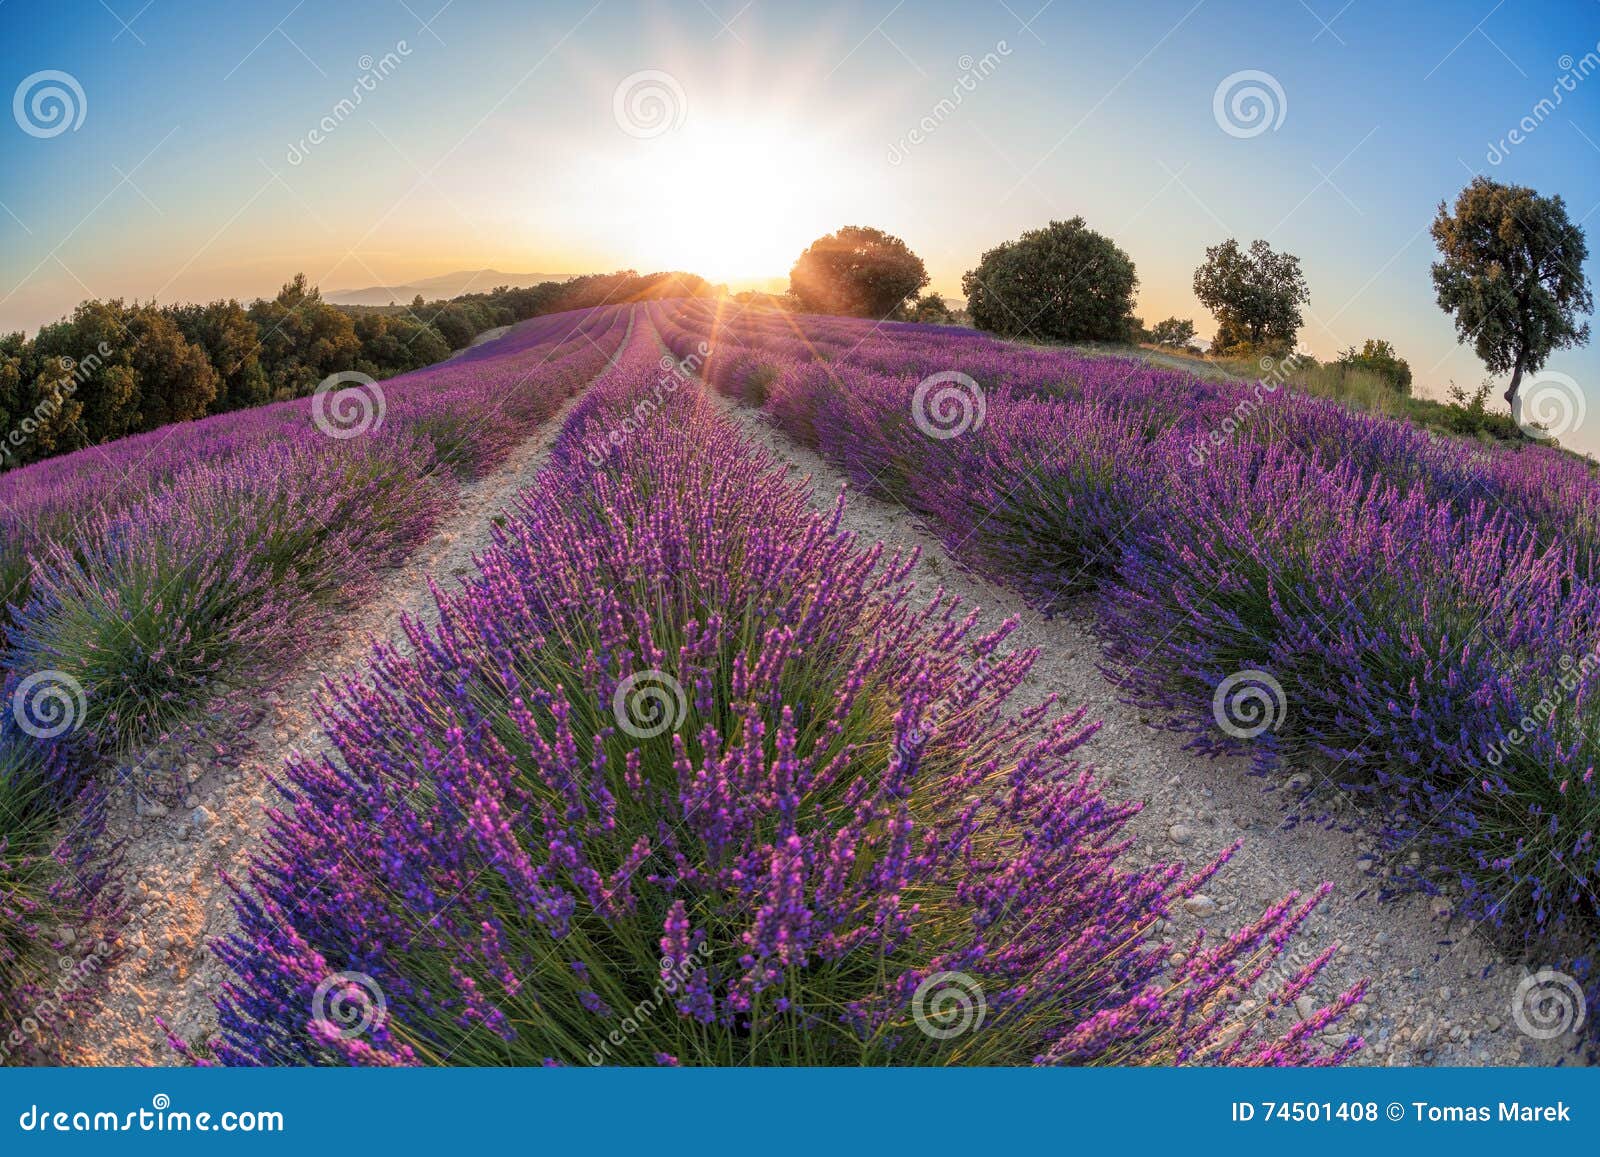 provence with lavender field at sunset, valensole plateau area in south of france